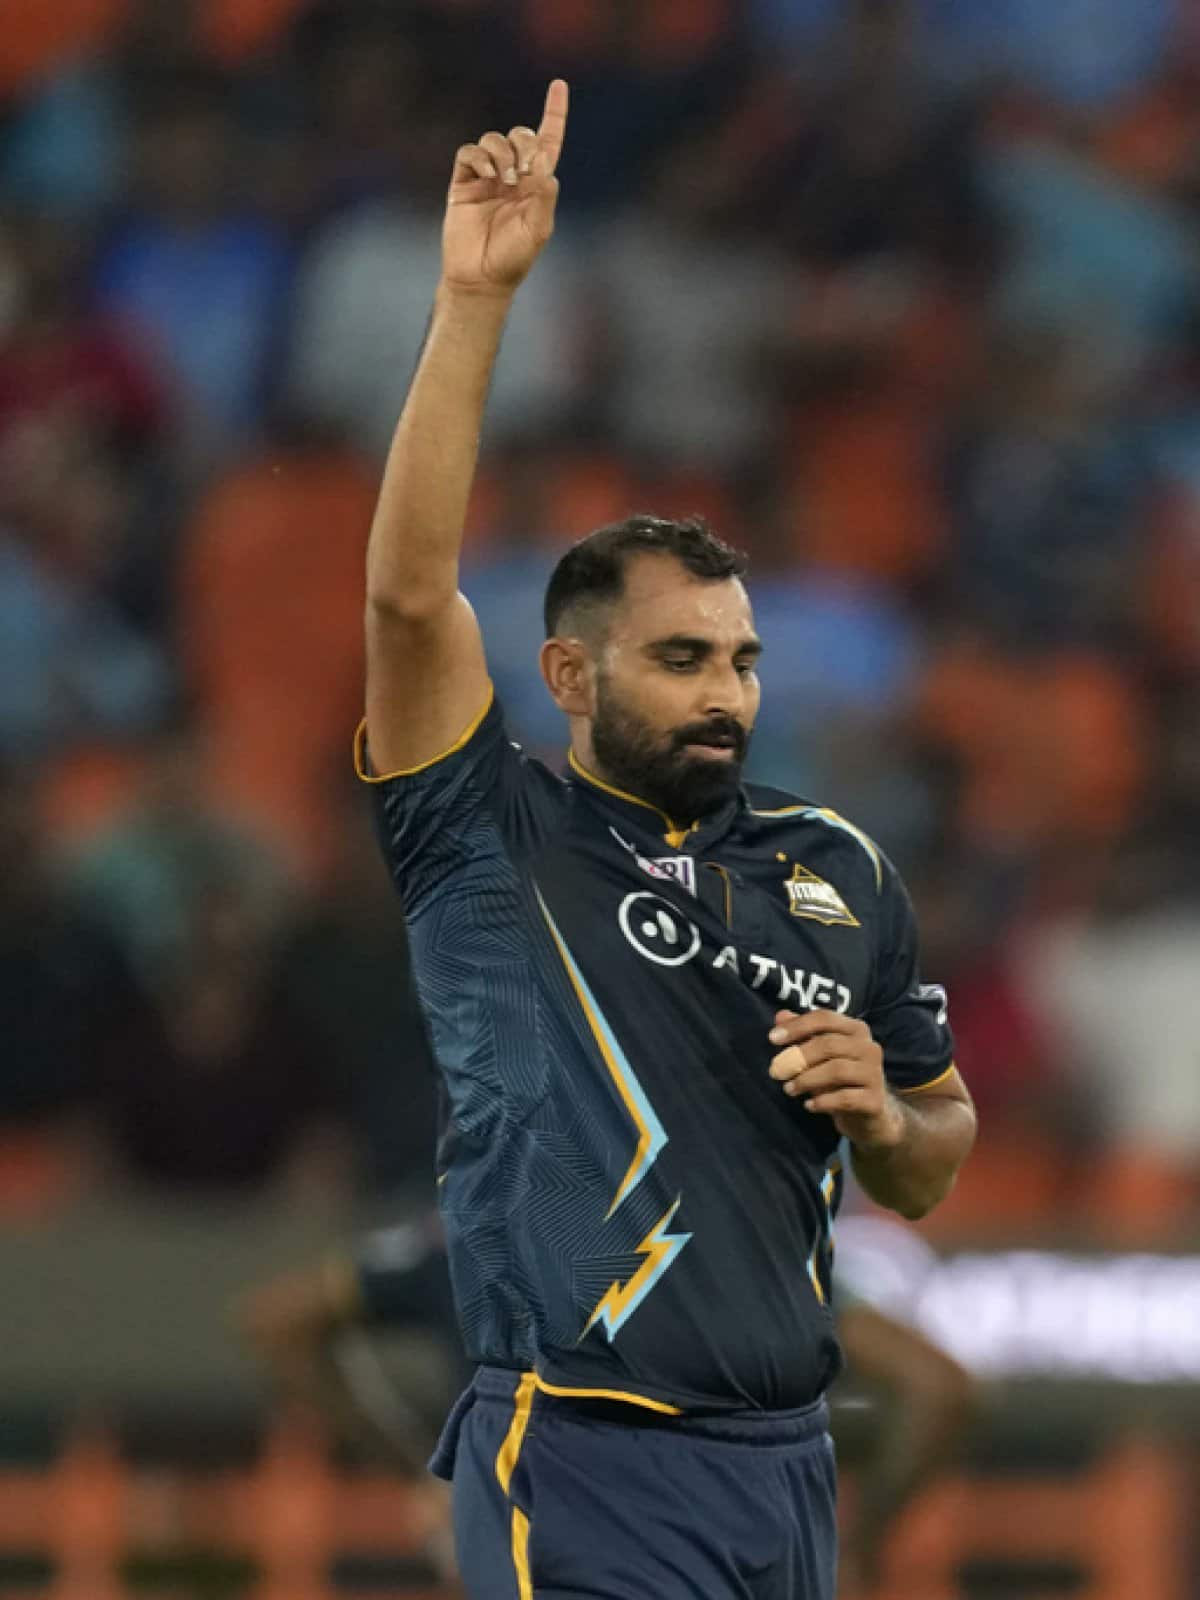 No Replacement Named For Shami